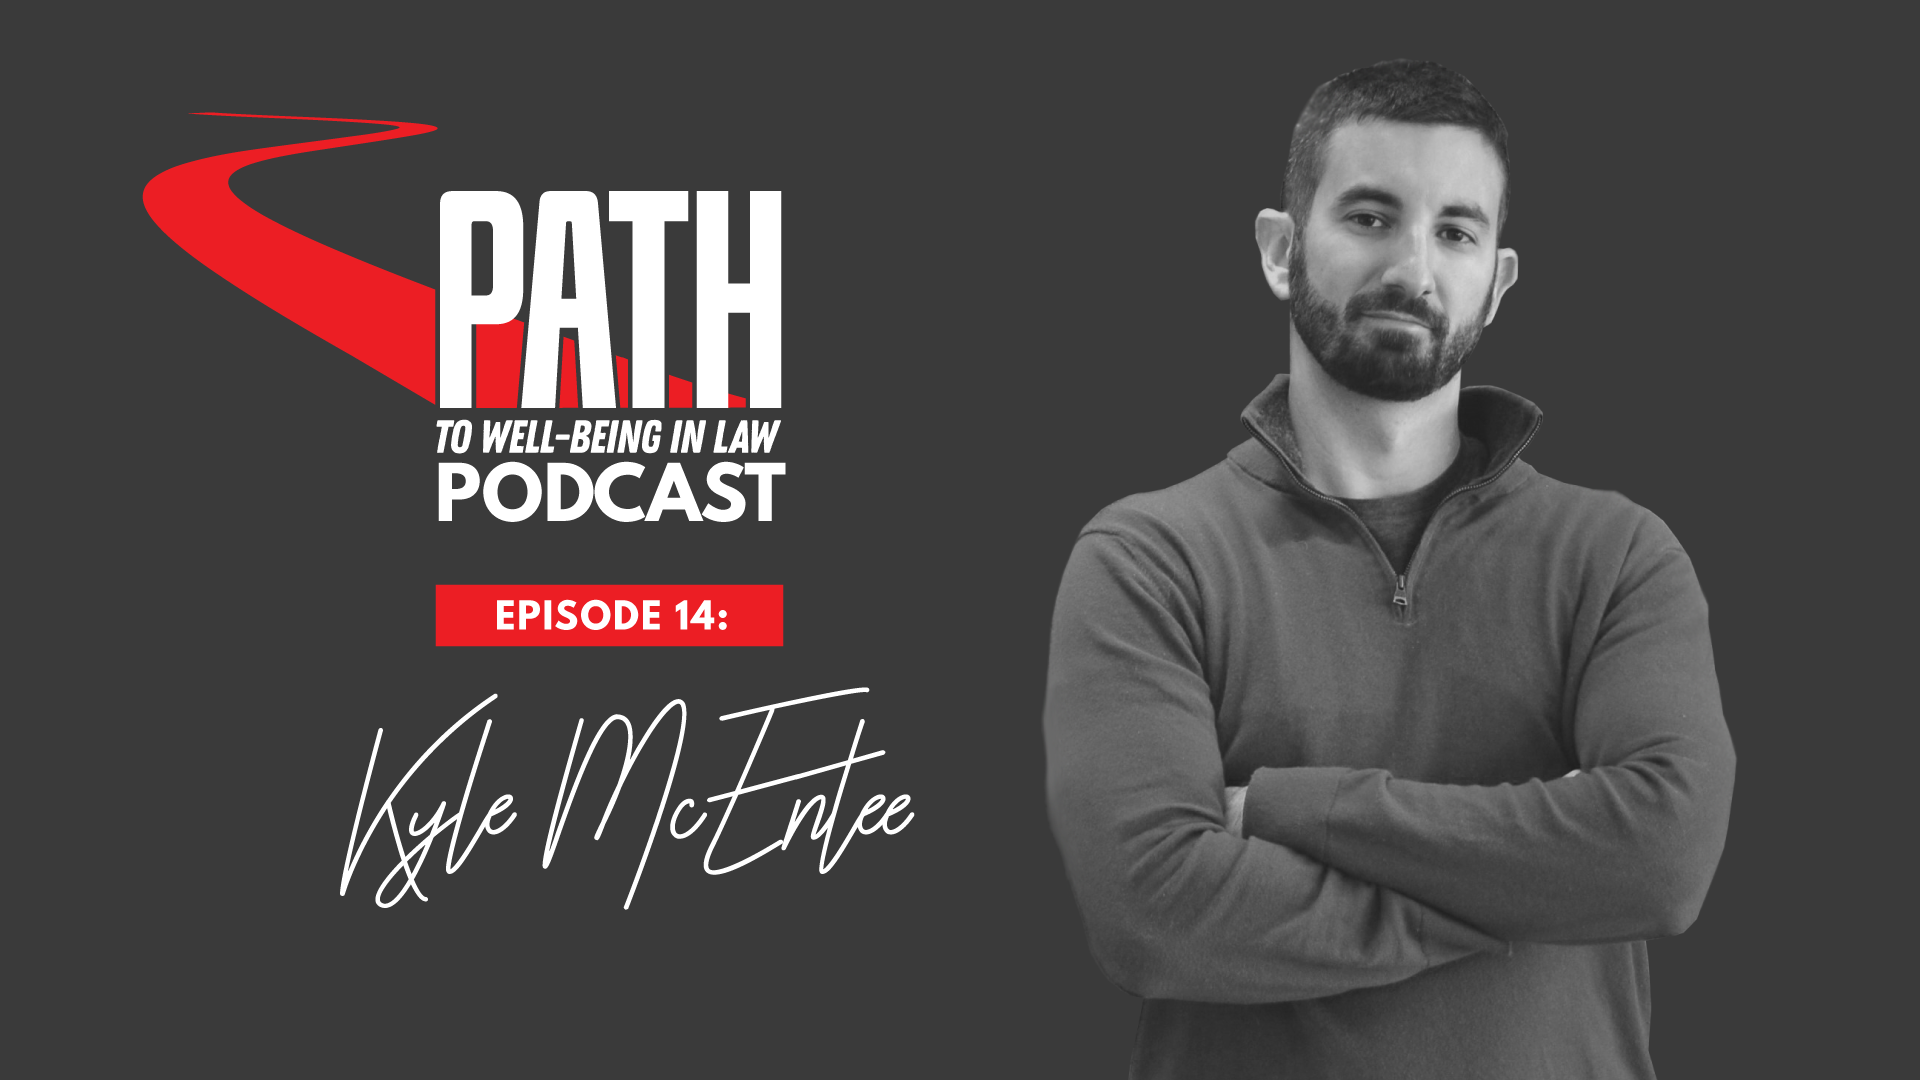 Path To Well-Being In Law: Episode 14 – Kyle McEntee